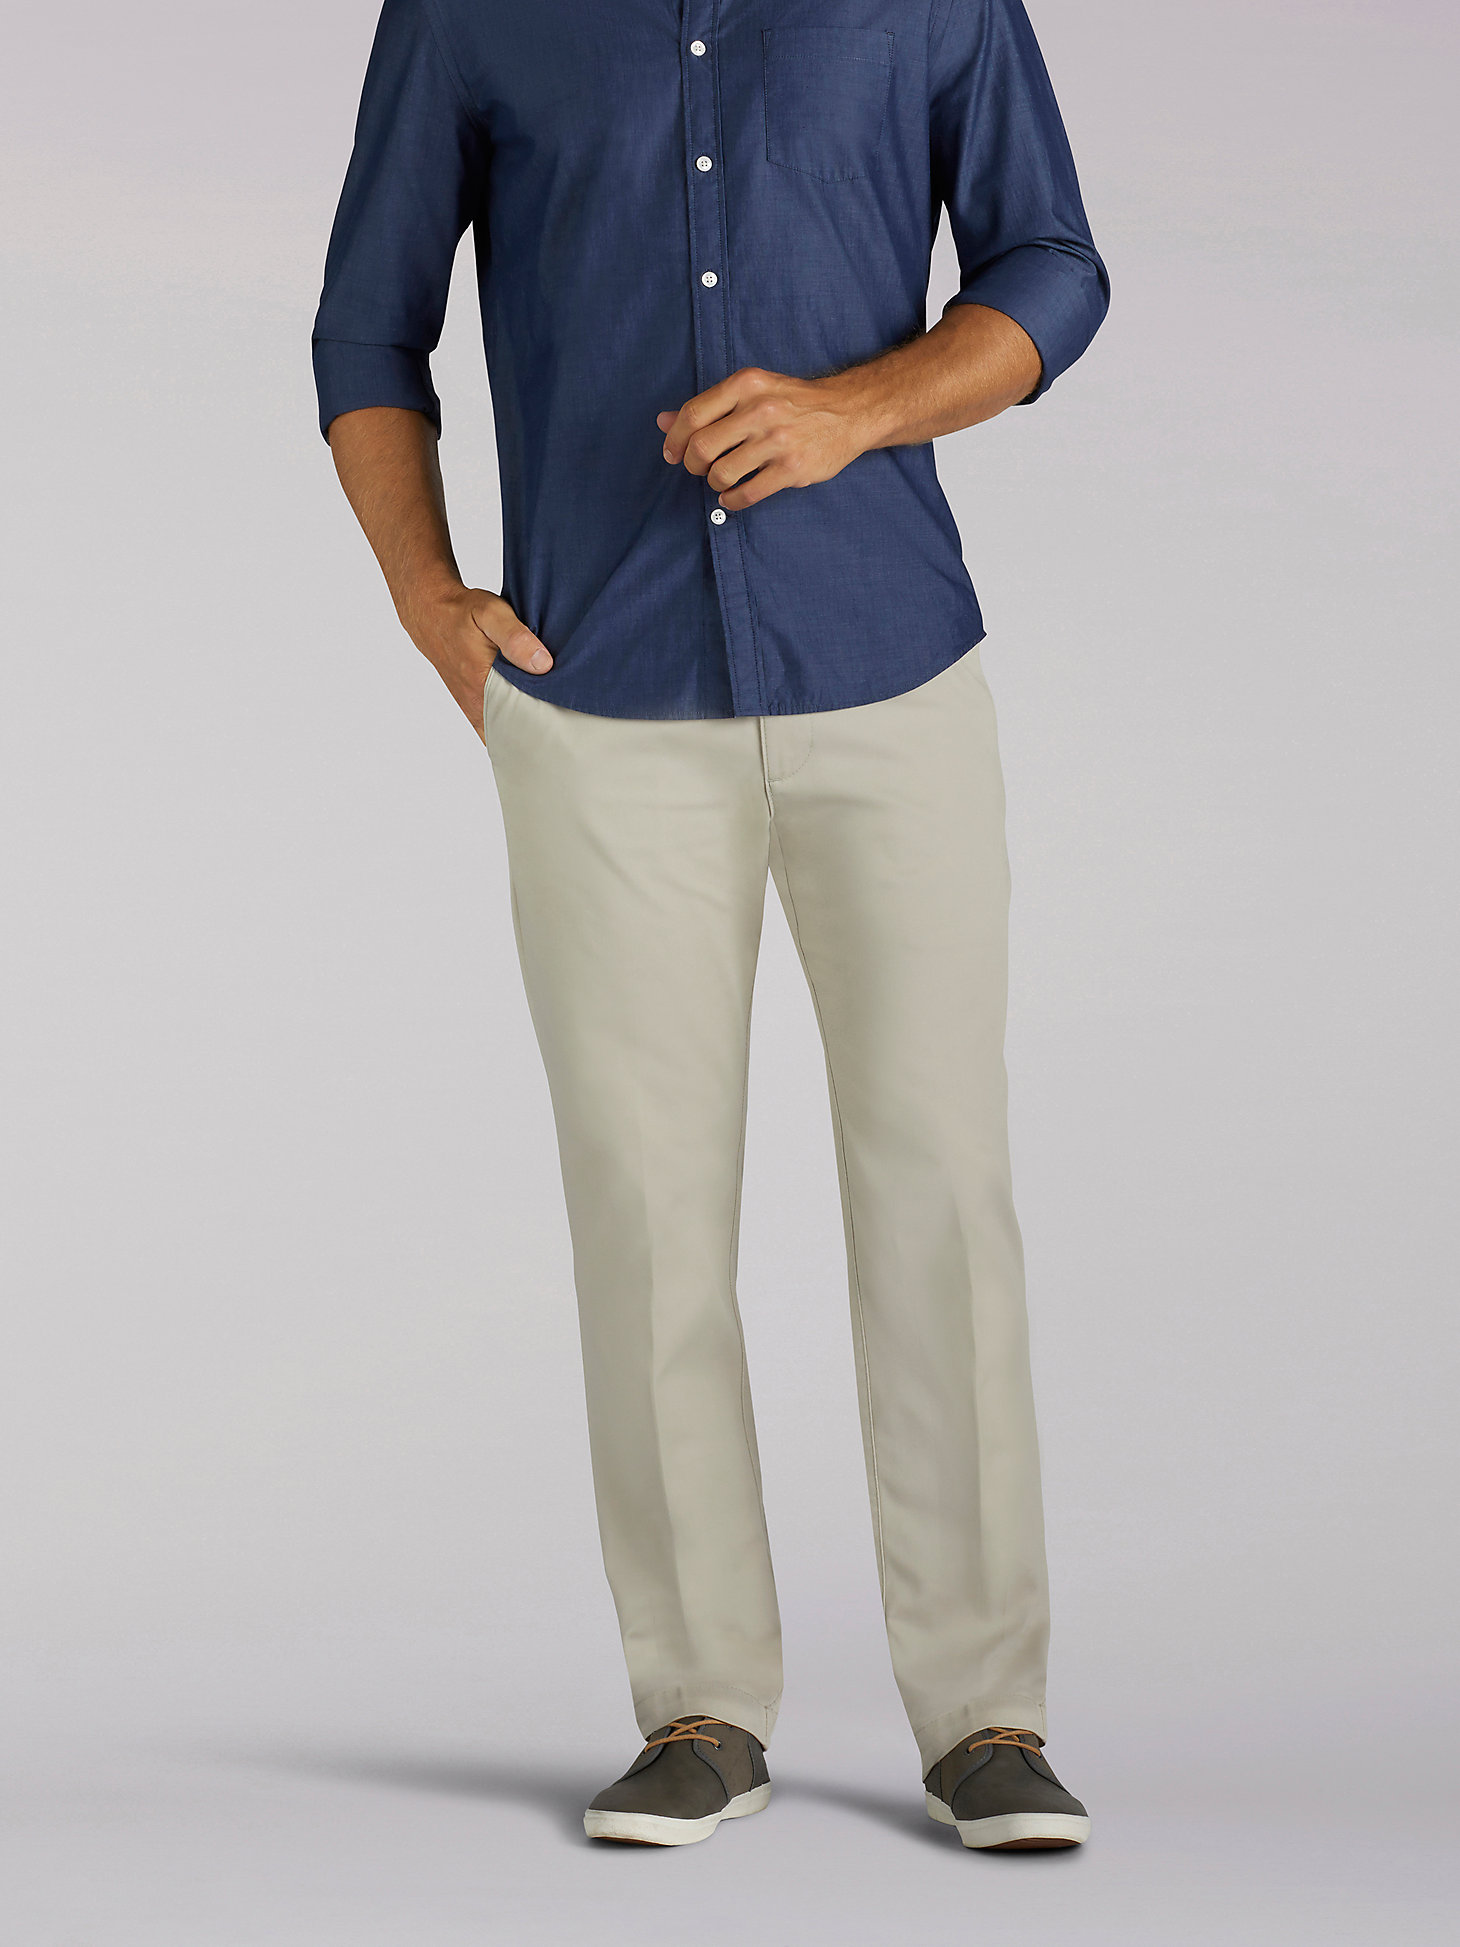 Men's Extreme Motion Relaxed Fit Pant (Big & Tall) in Dove alternative view 3